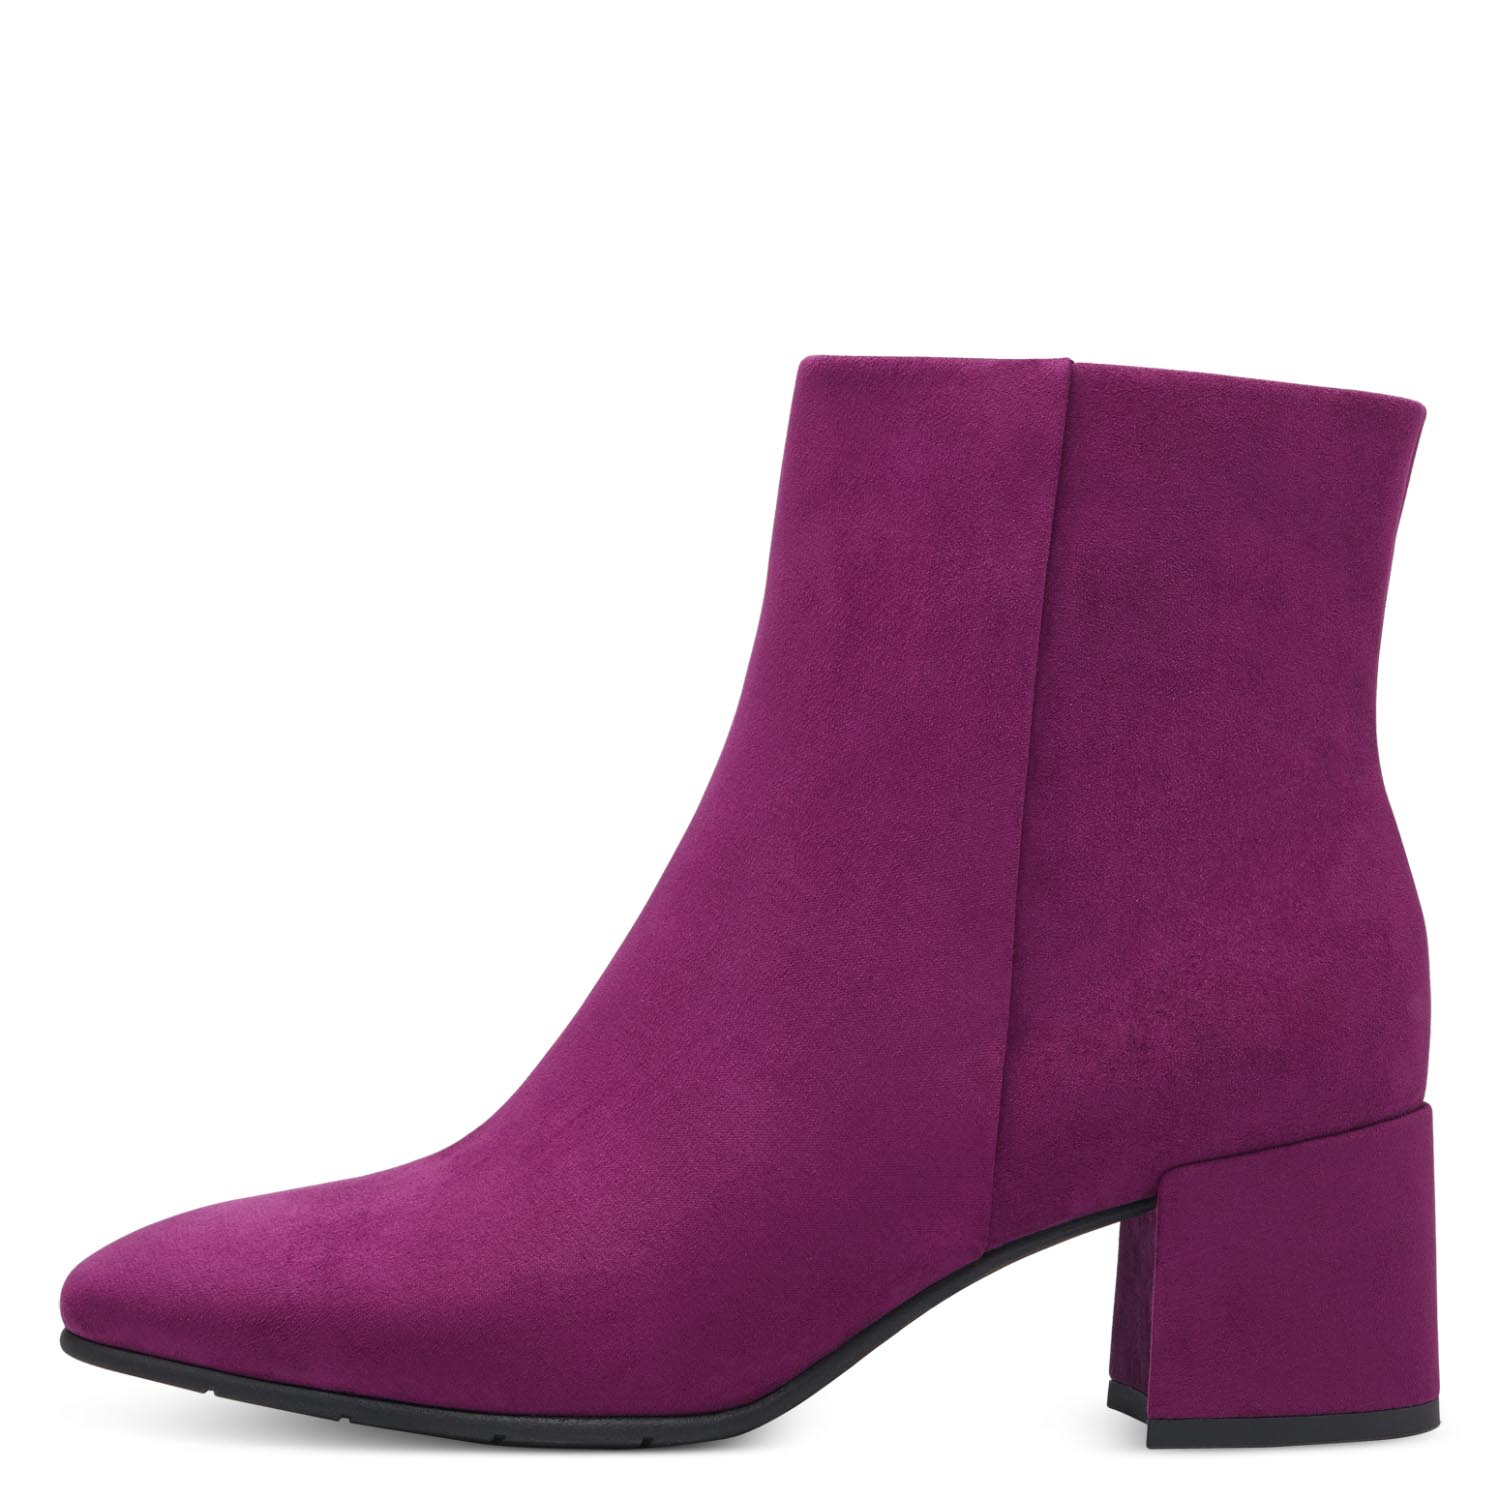 Front view of the grape-coloured Marco Tozzi boot.